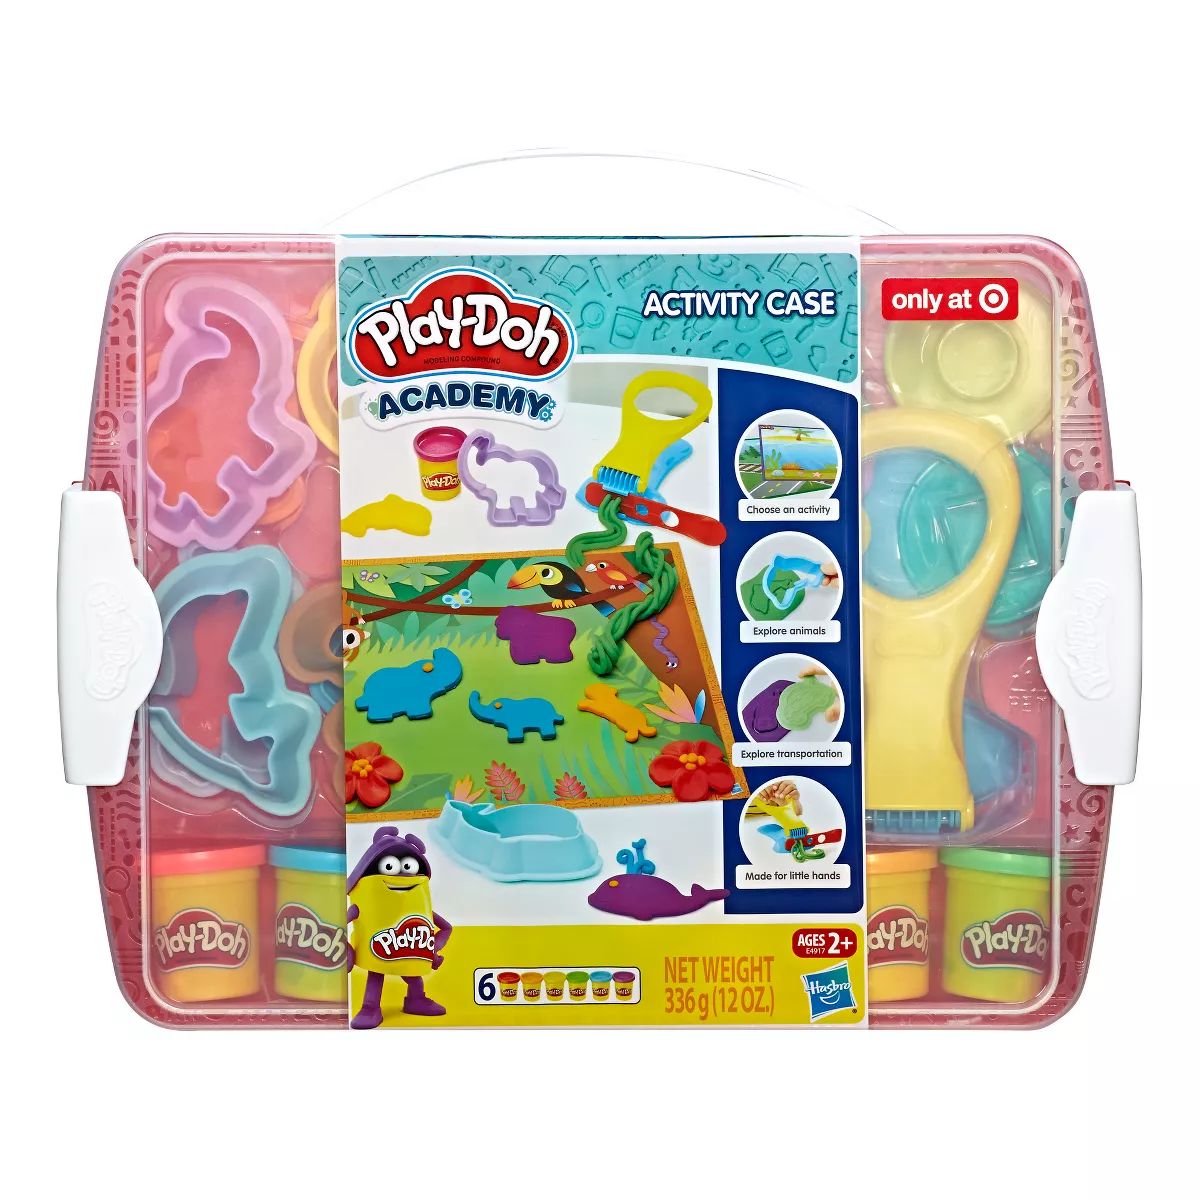 Play-Doh Academy Activity Case | Target